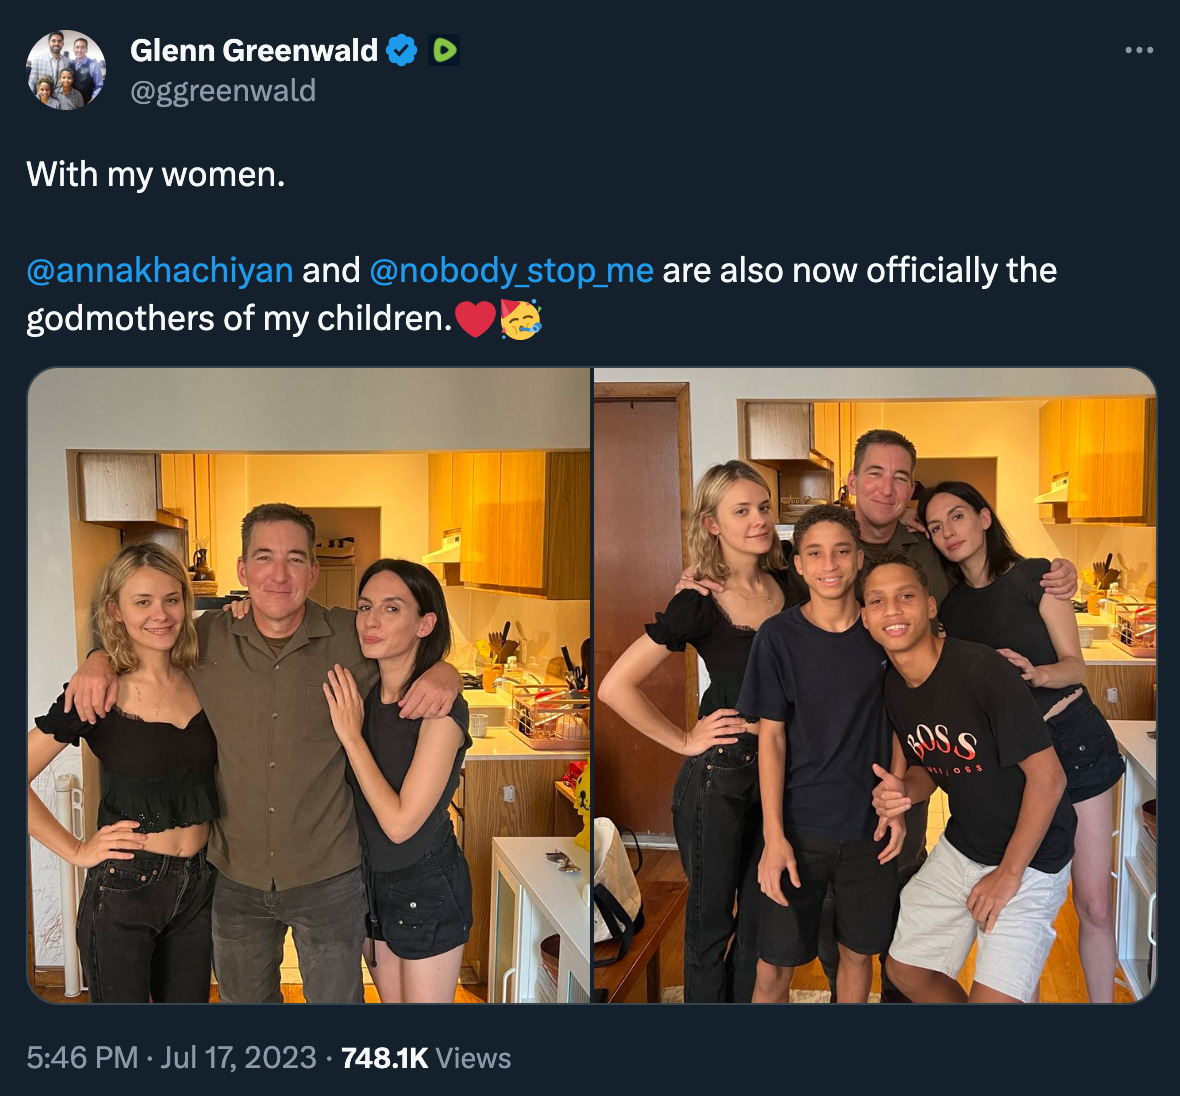 Glenn Greenwald tweets two pictures of himself and his adopted kids with Dasha and Anna Khachiyan, with the caption: “With my women. @annakhachiyan and @nobody_stop_me are also now officially the godmothers of my children.”